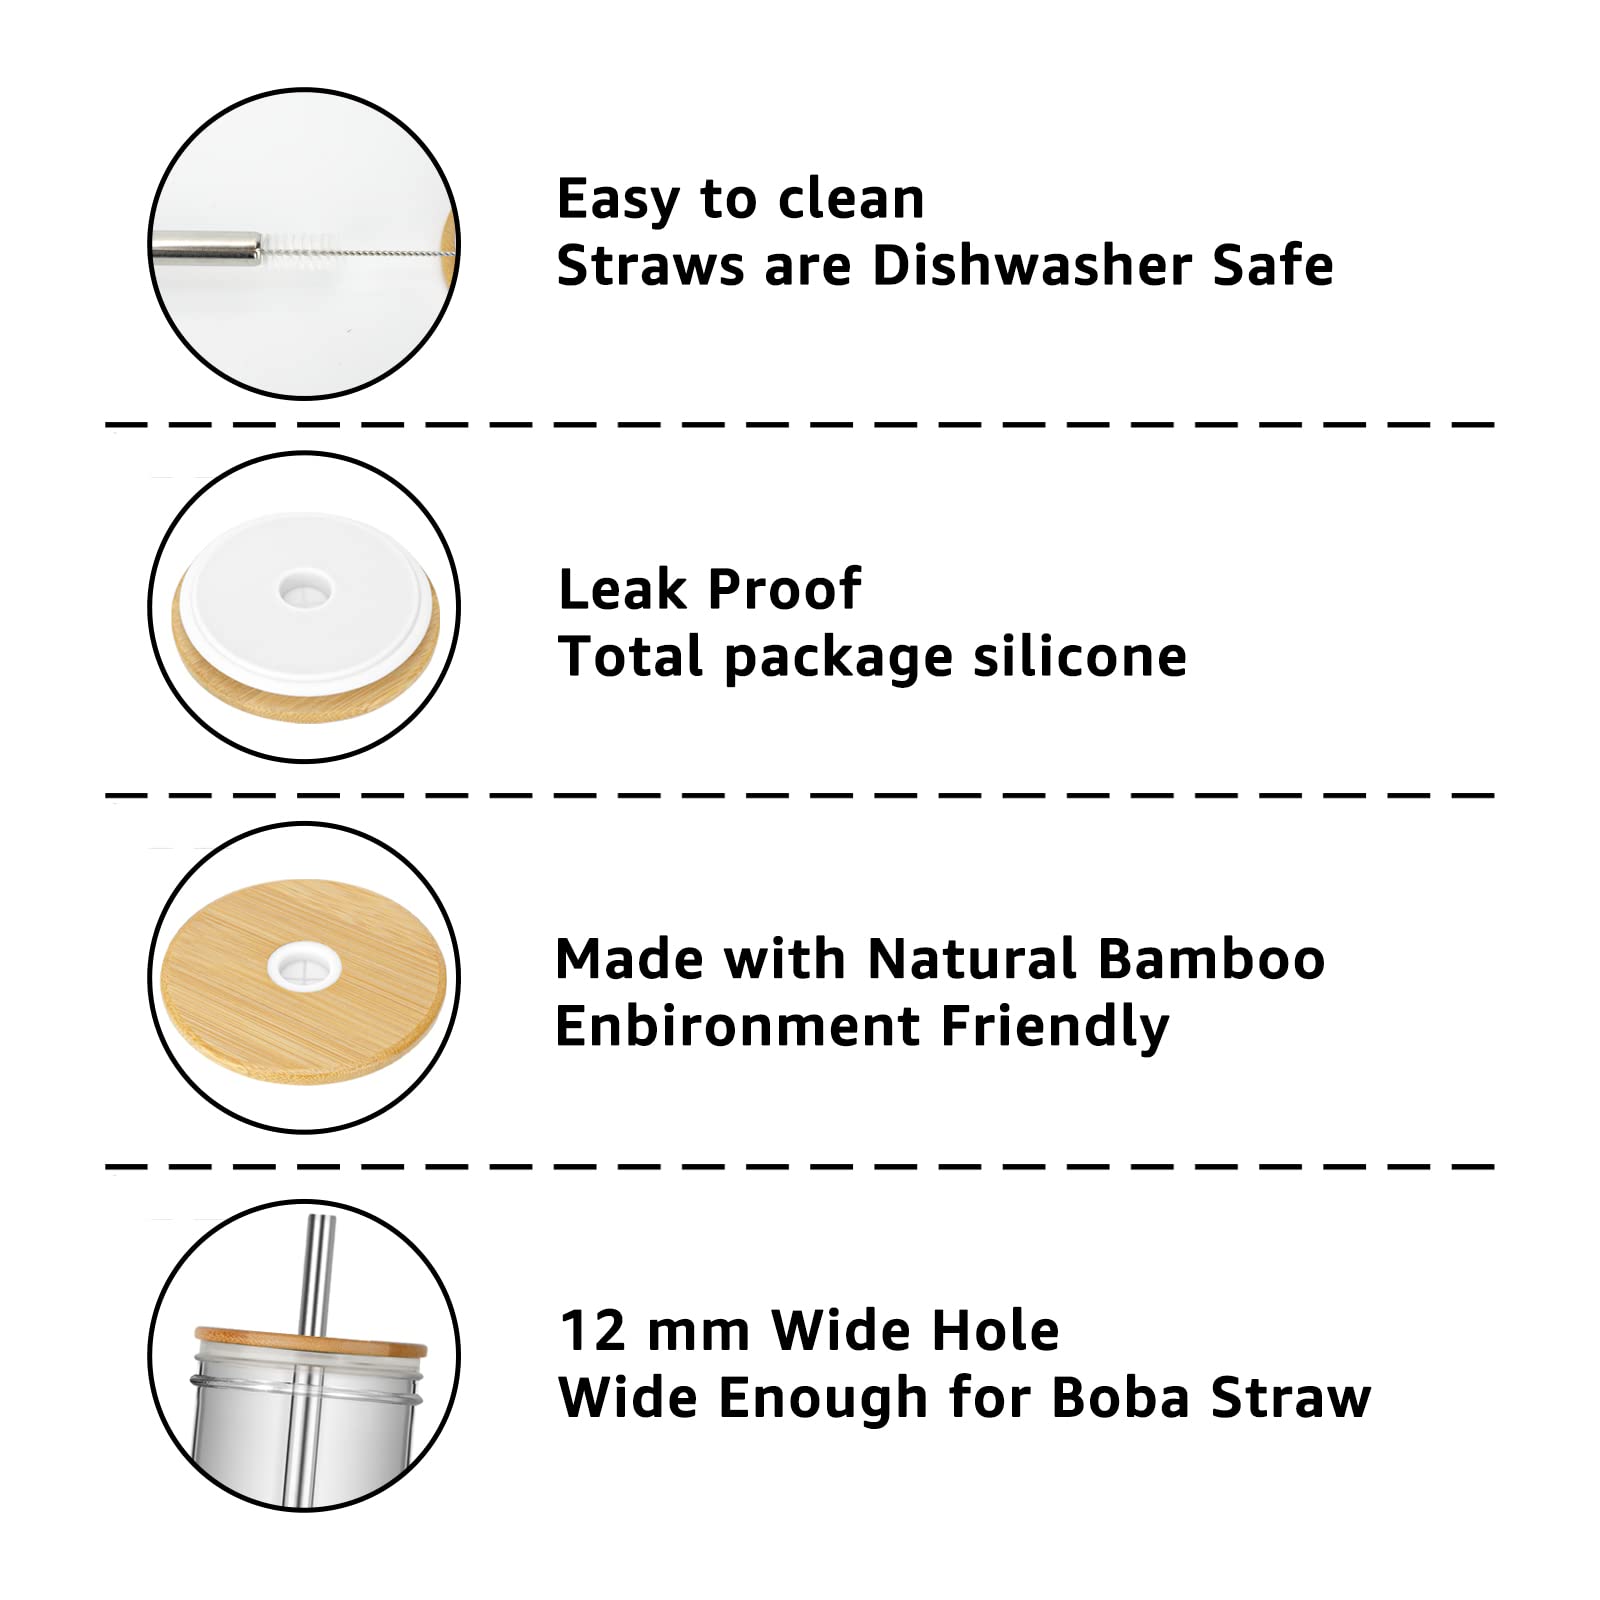 Tronco Mason Jar Lids with Stainless Steel Straws, 2 Reusable Mason Jar Bamboo Lids with Straw Hole, 2 Straws and 1 Straw Brush, for Wide Mouth Mason Jar Tumbler Lids